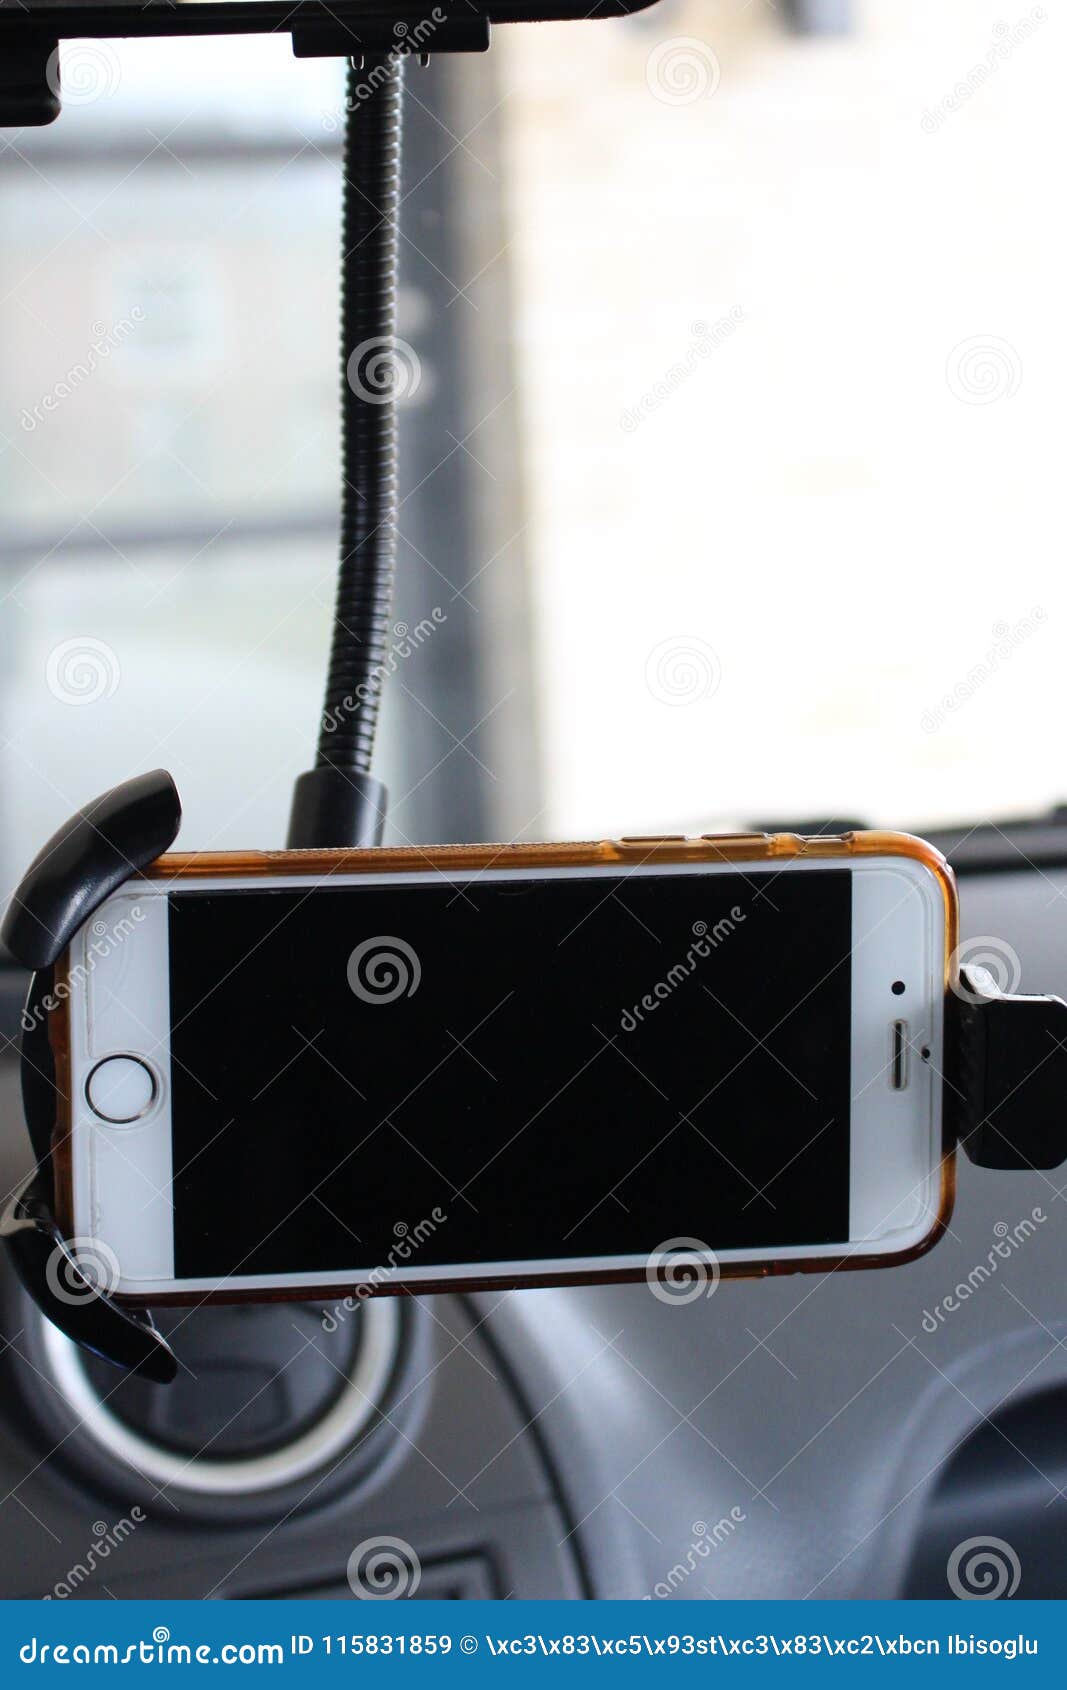 Optø, optø, frost tø ler interpersonel Car Holder for Mobil Device. Driving a Car with Phone in Holder Stock Image  - Image of mobil, device: 115831859